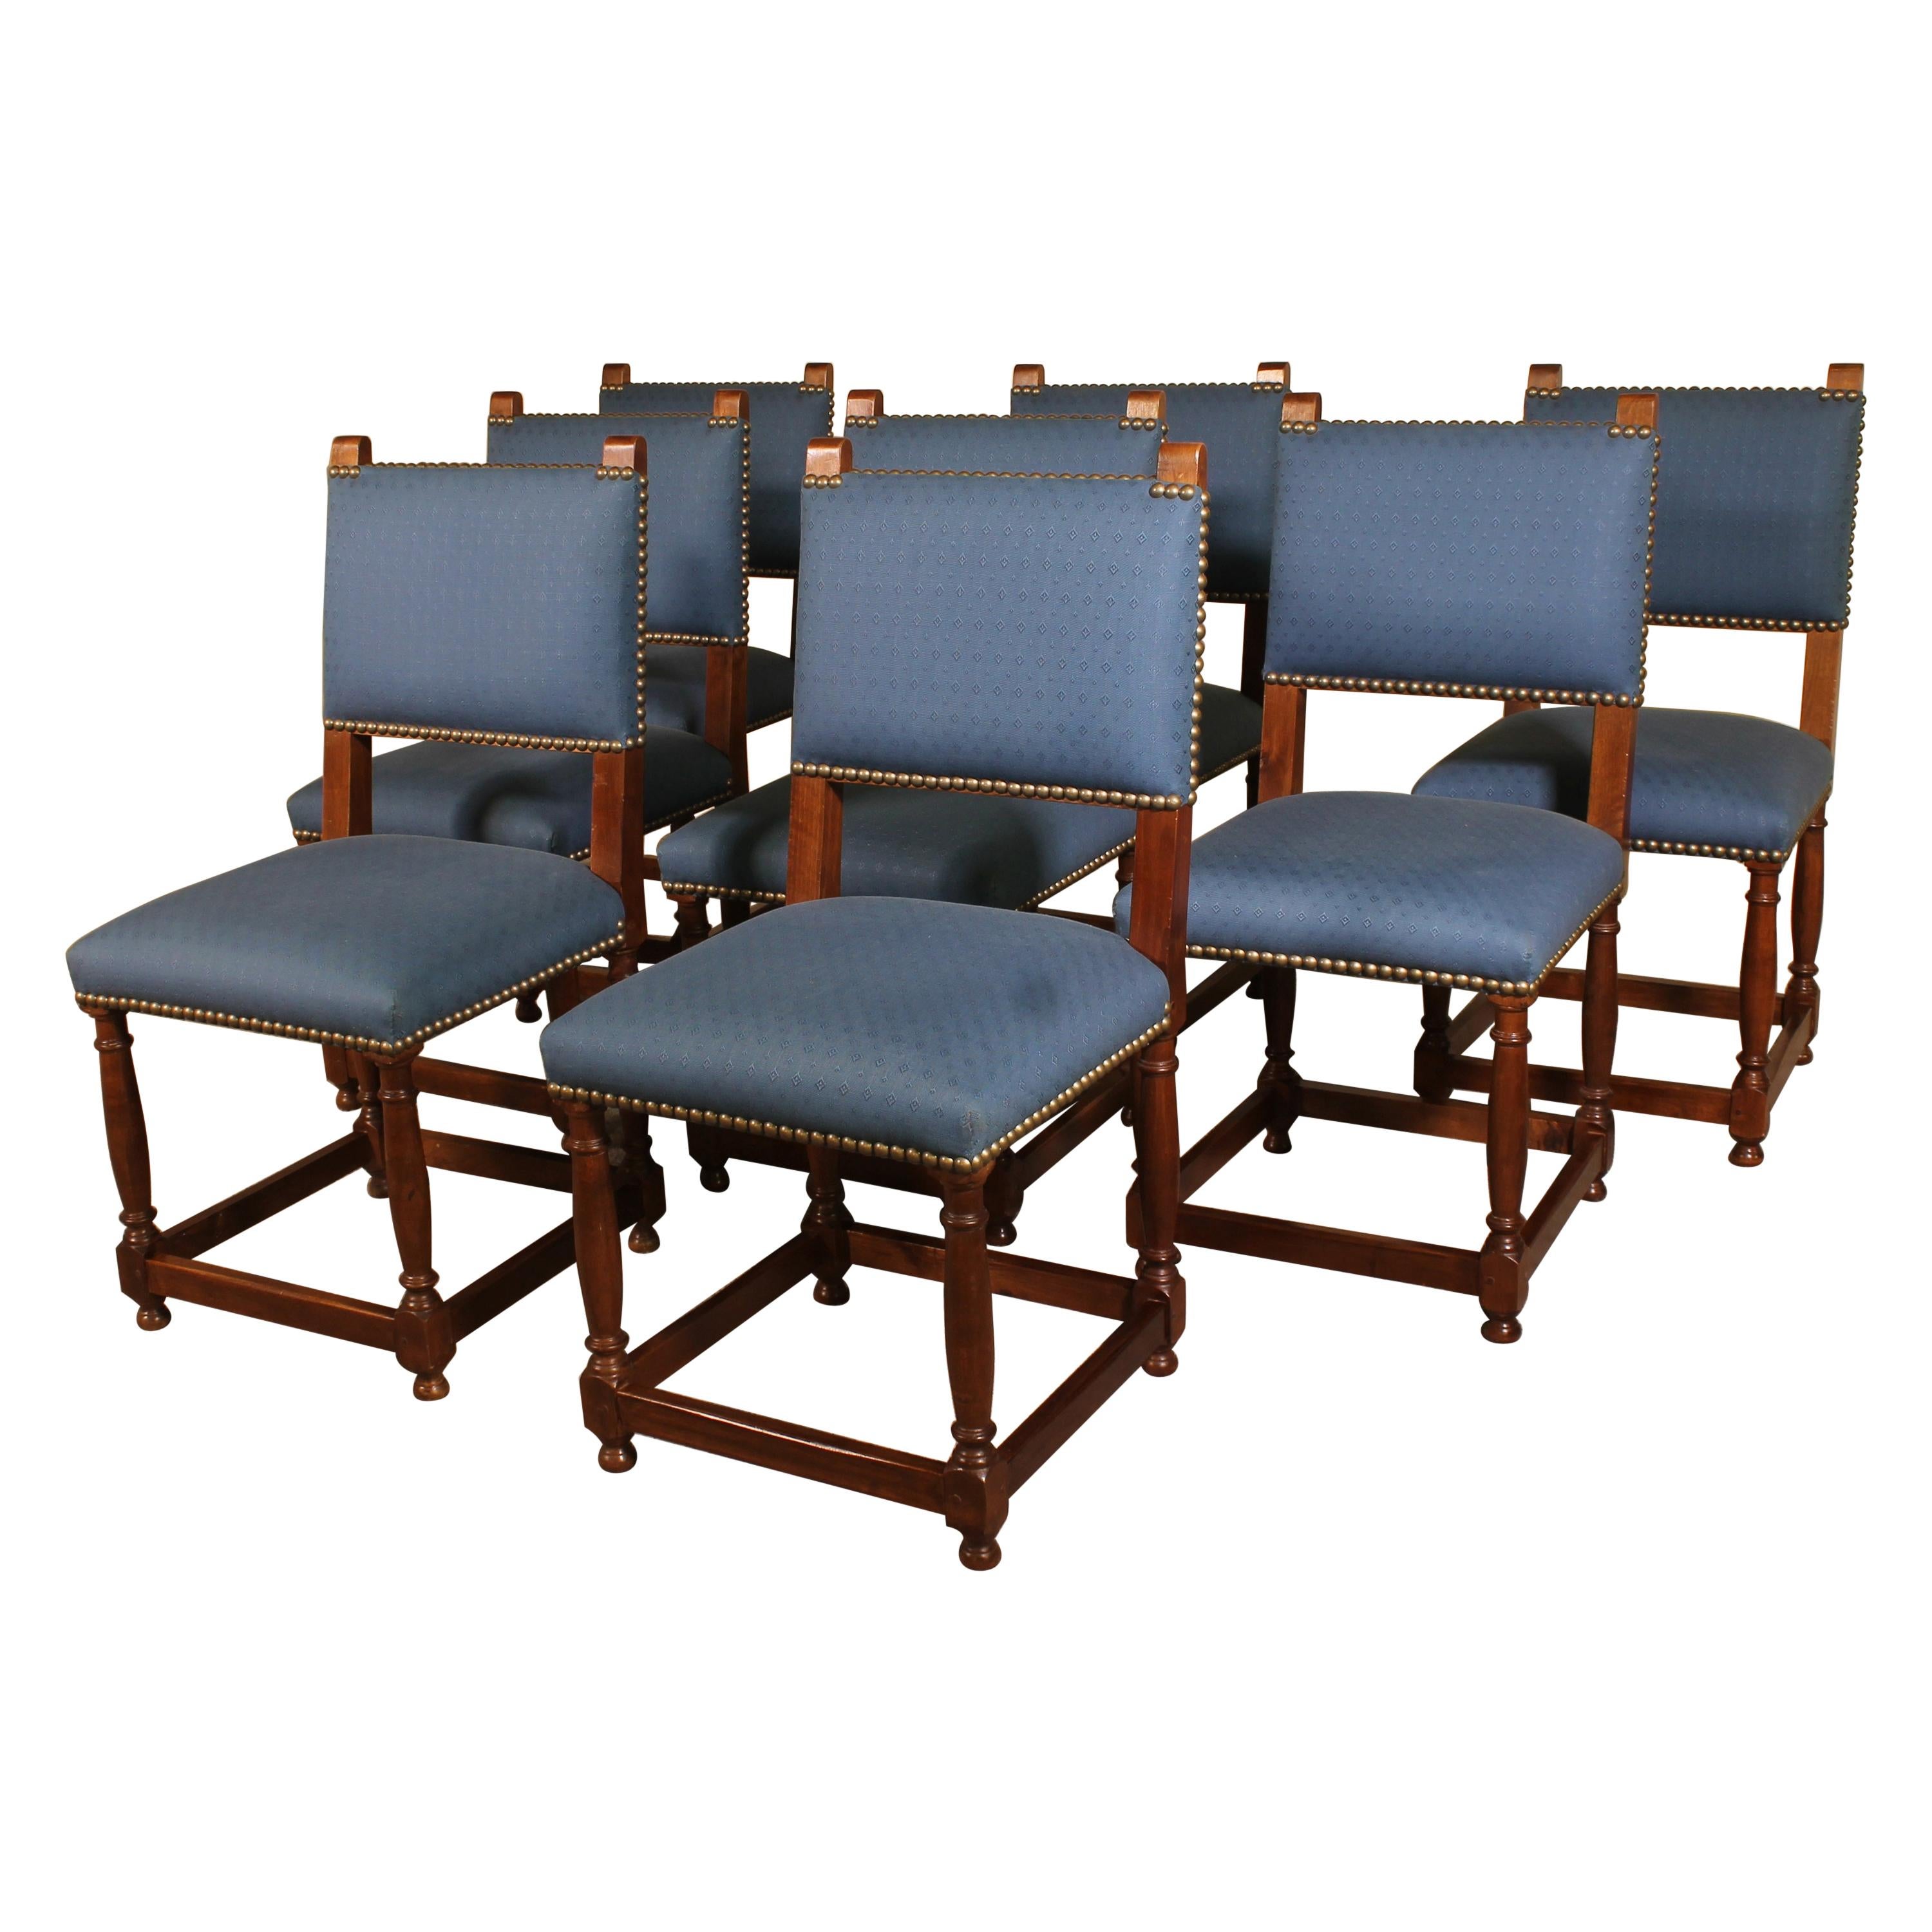 Set of 8 Louis XIII Style Chairs in Walnut